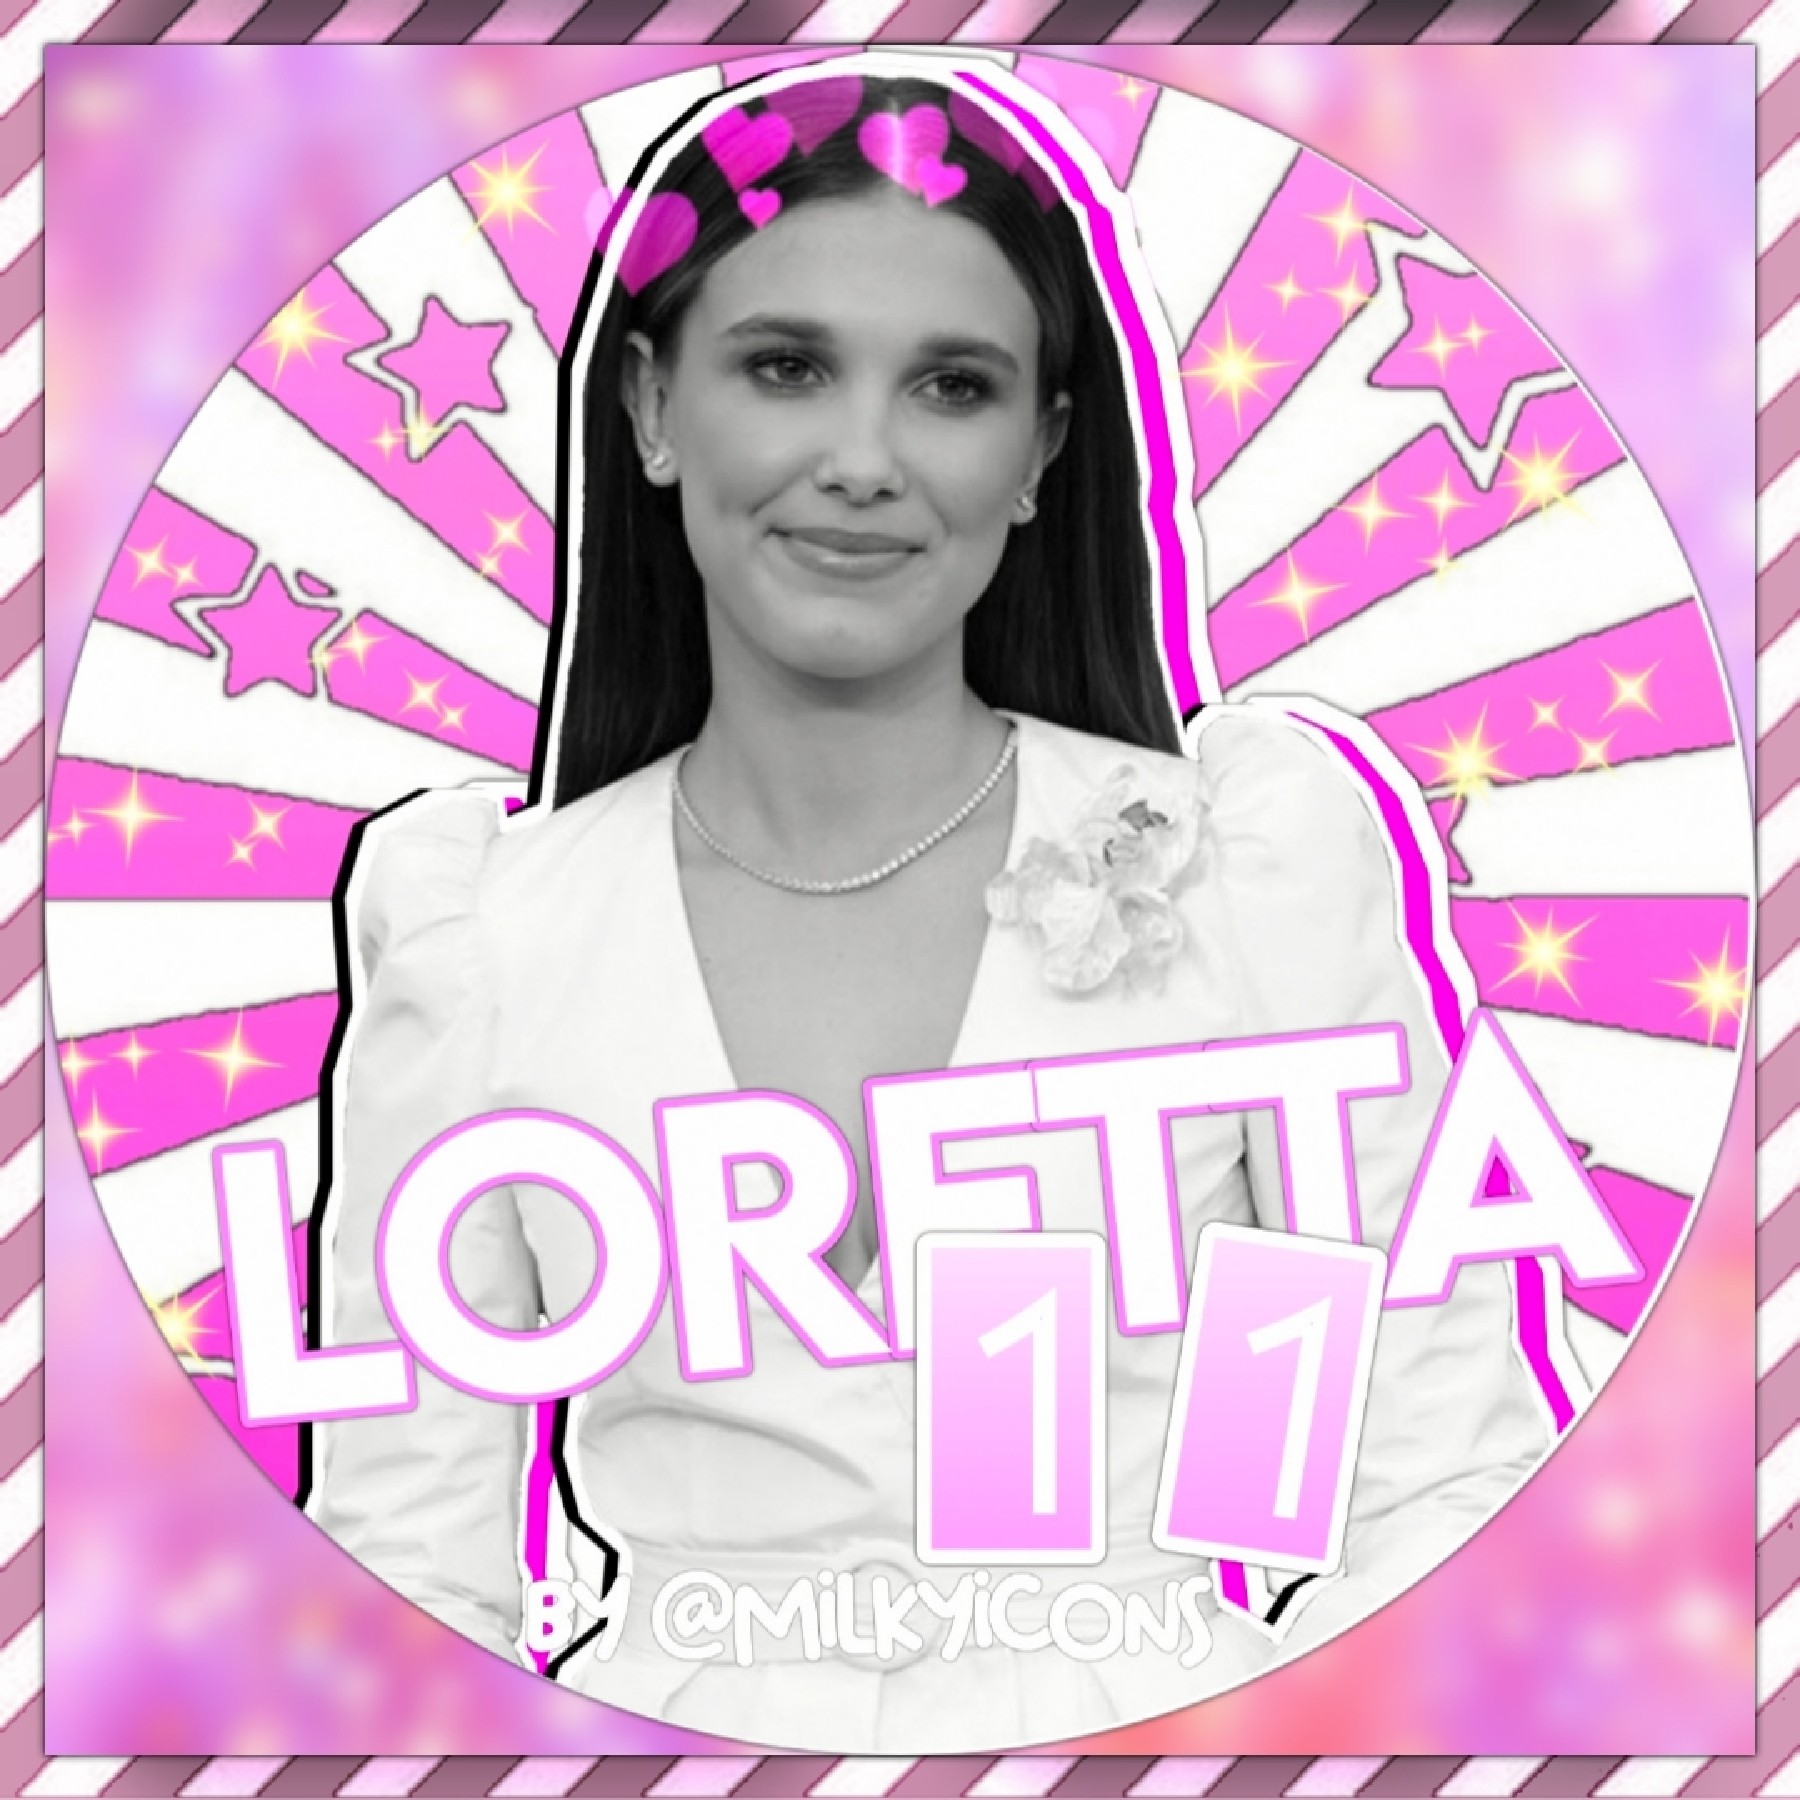 icon for: @Loretta11🍭
style: simple
color: hot pink💗
hope you like it!😊 give credits if used🙏🏻